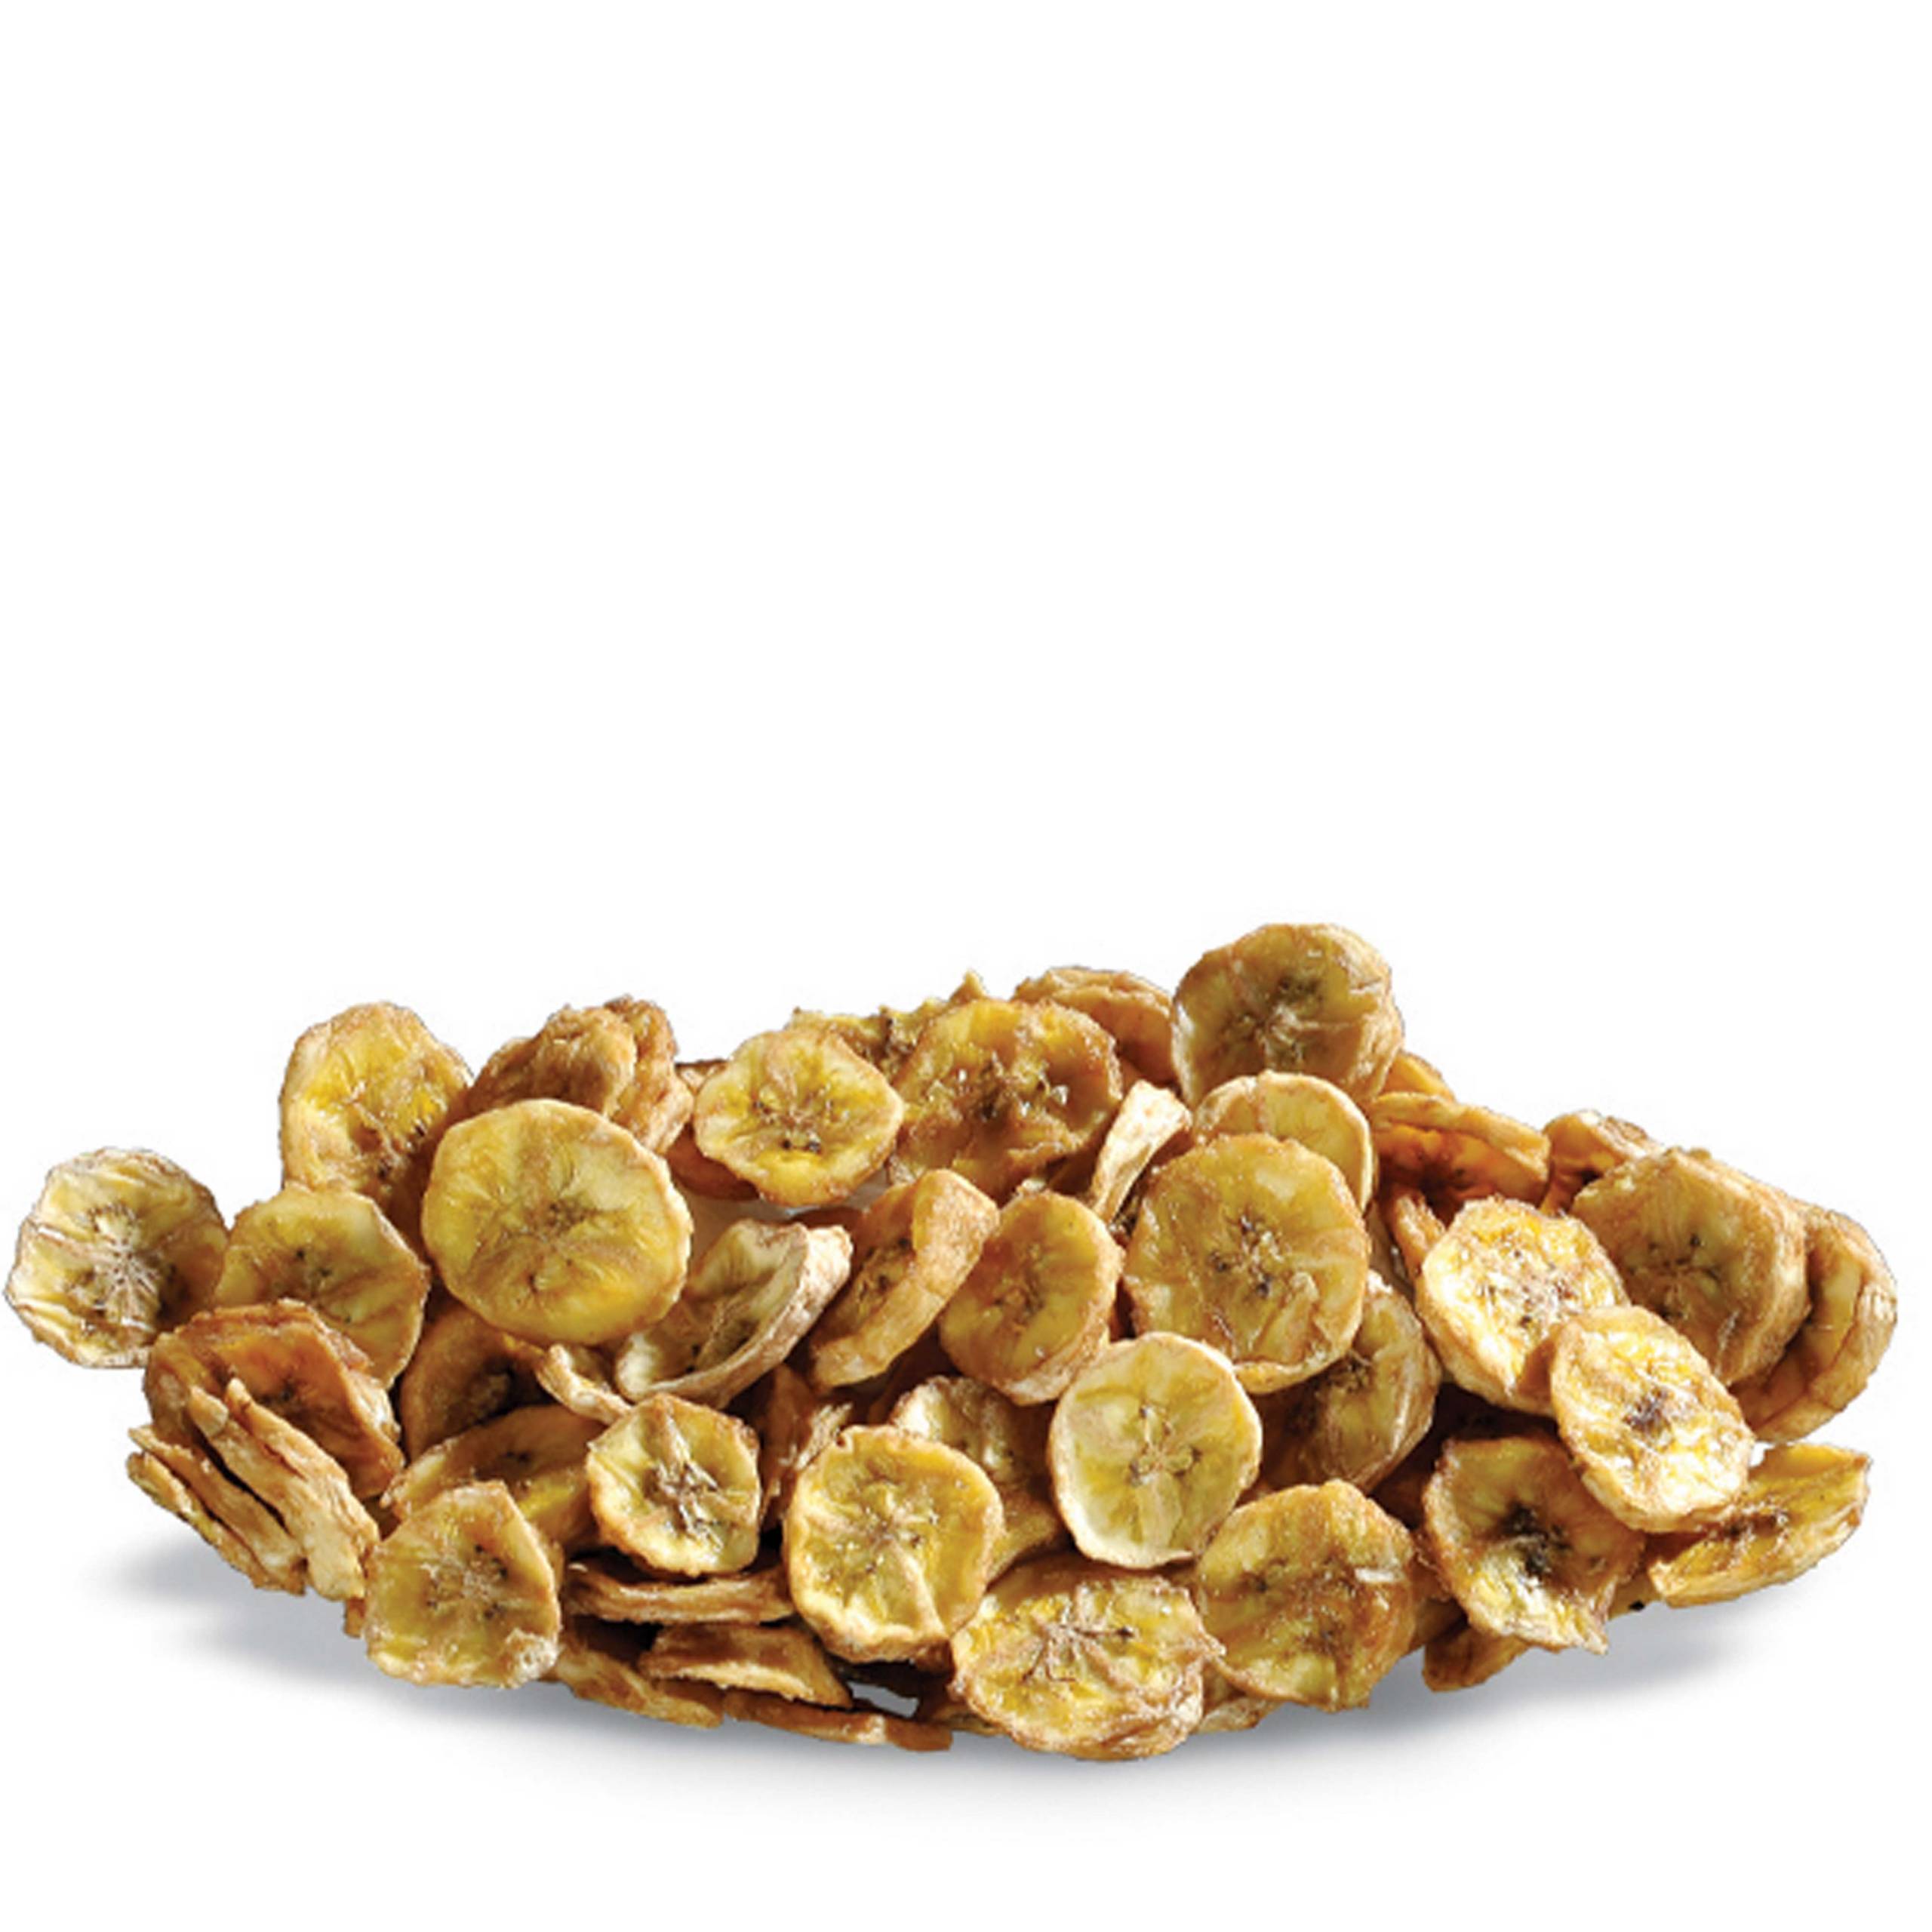 Looking for quality organic dehydrated banana coins at wholesale prices? — NutriCraft